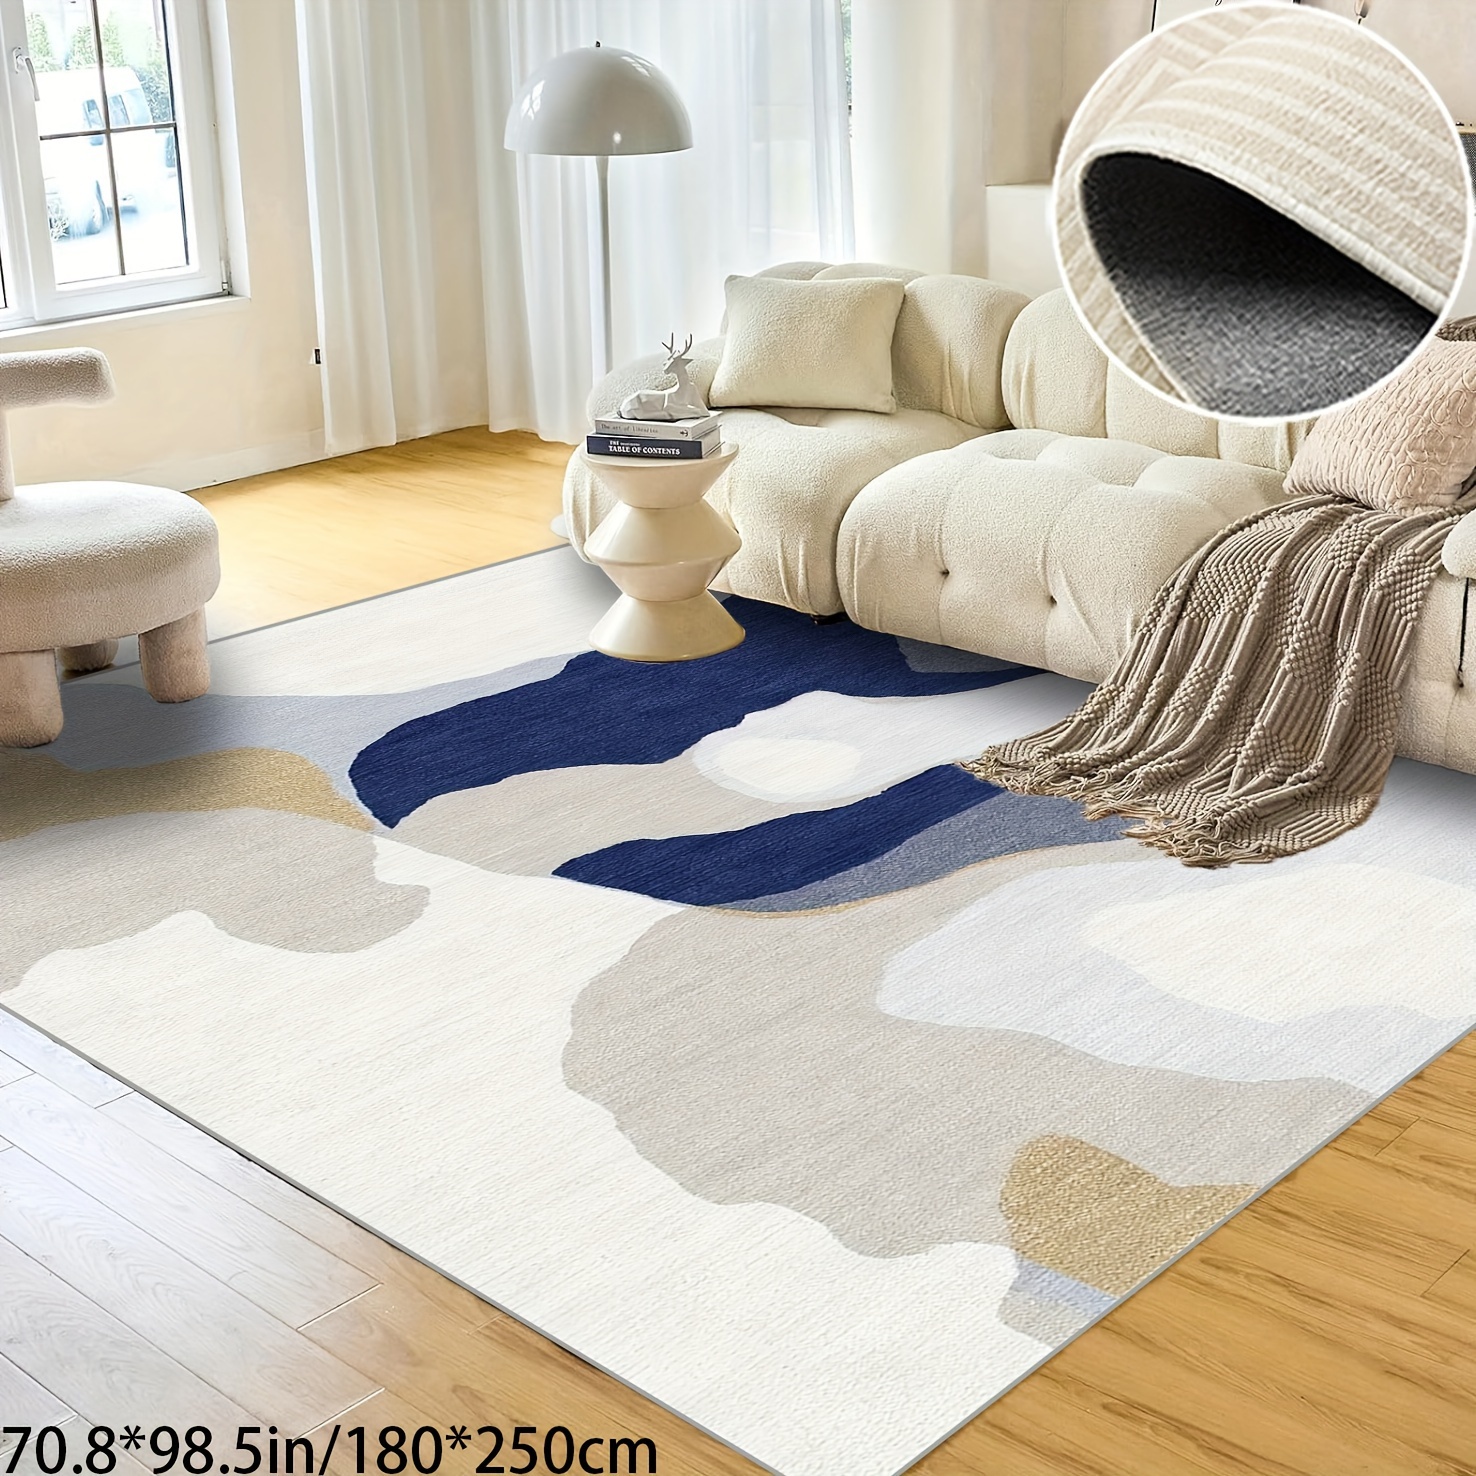 

Meeting Living Room Rug European Simple Nordic Abstract Blue Graffiti Oil Painting Pattern Washable Area Rug Office Hotel Living Room Bedroom Carpet Non-slip Waterproof Absorbent Durable